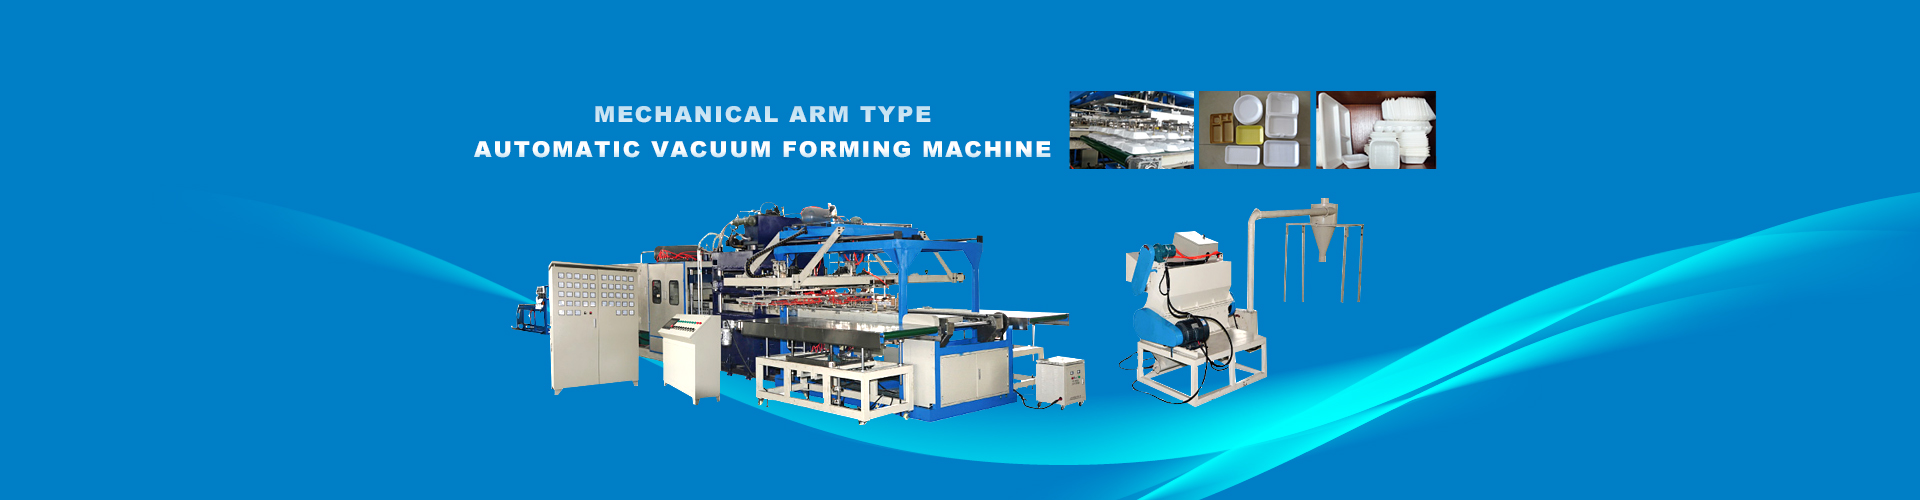 Mechanical Arm Type Automatic?Vacuum?Forming Machine